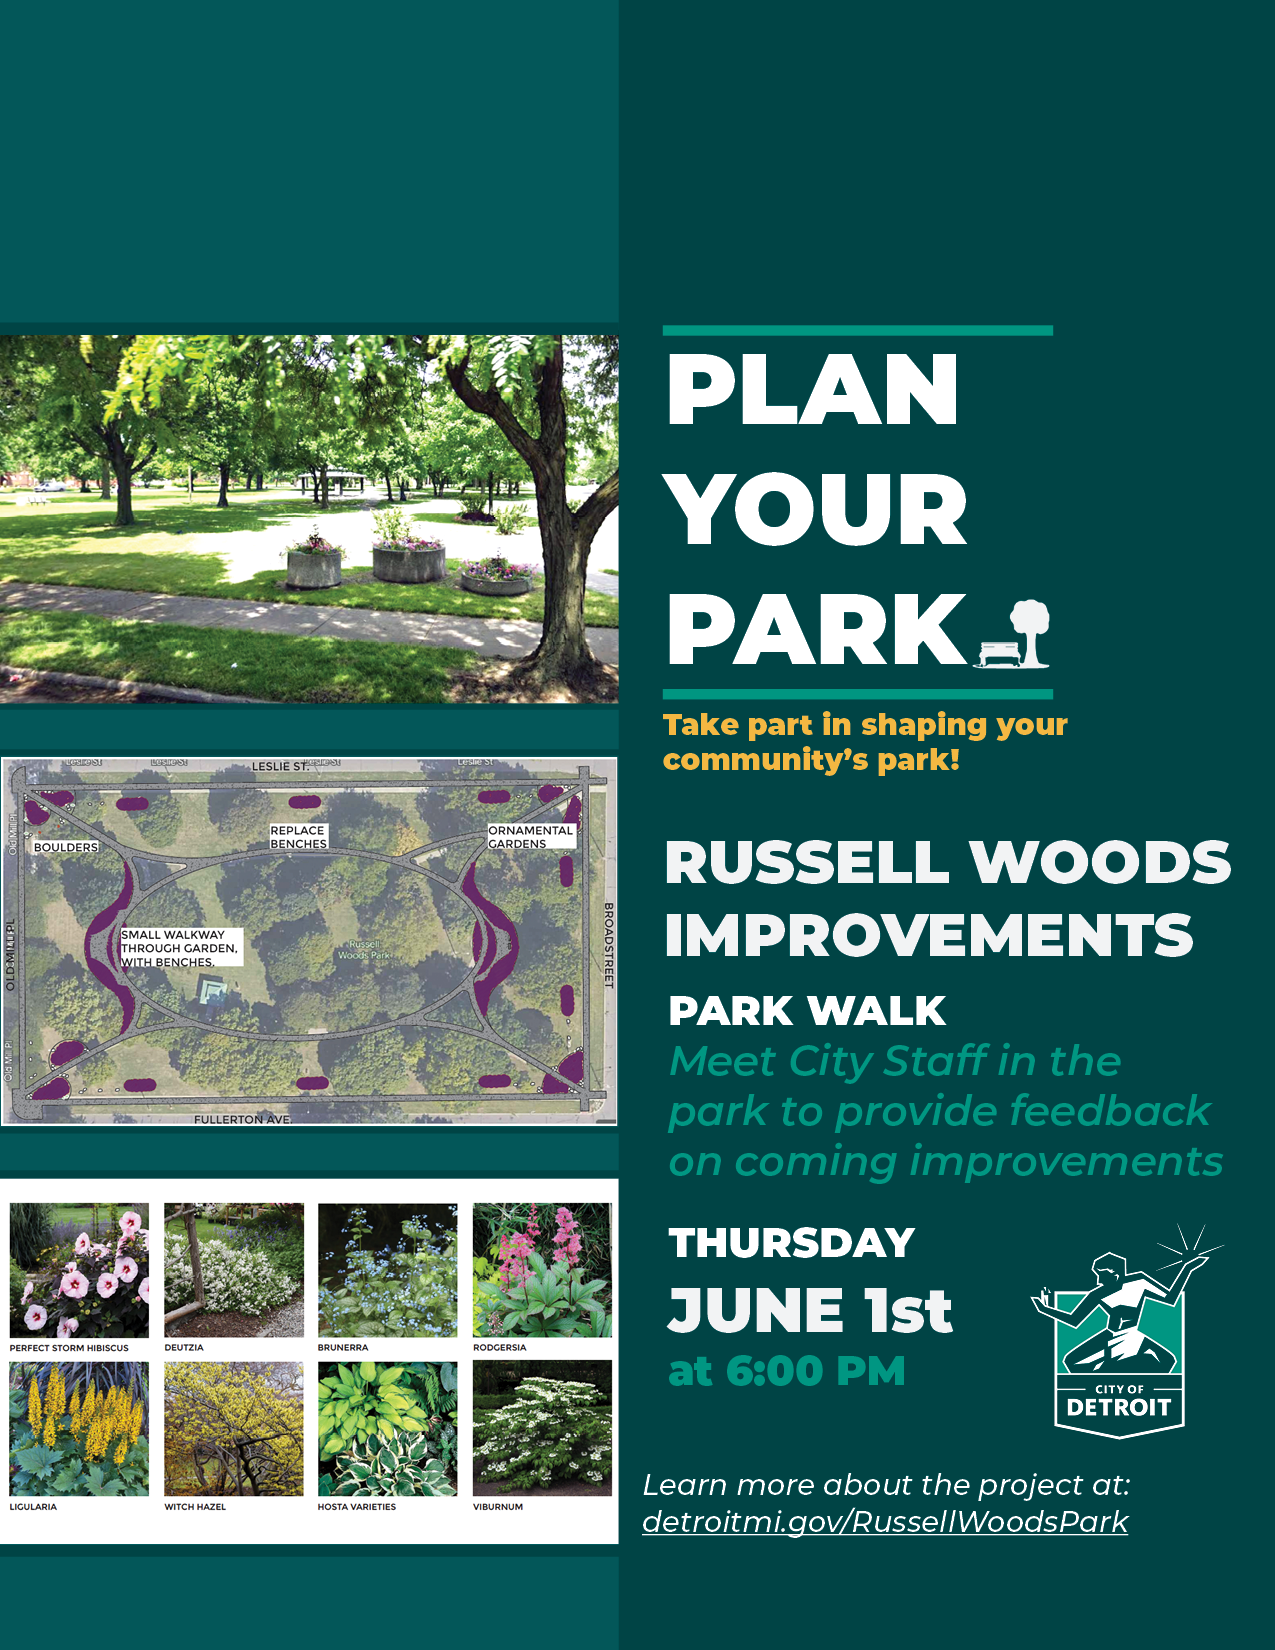 Park Walk through - June 1st at 6pm in Russell Woods Park.